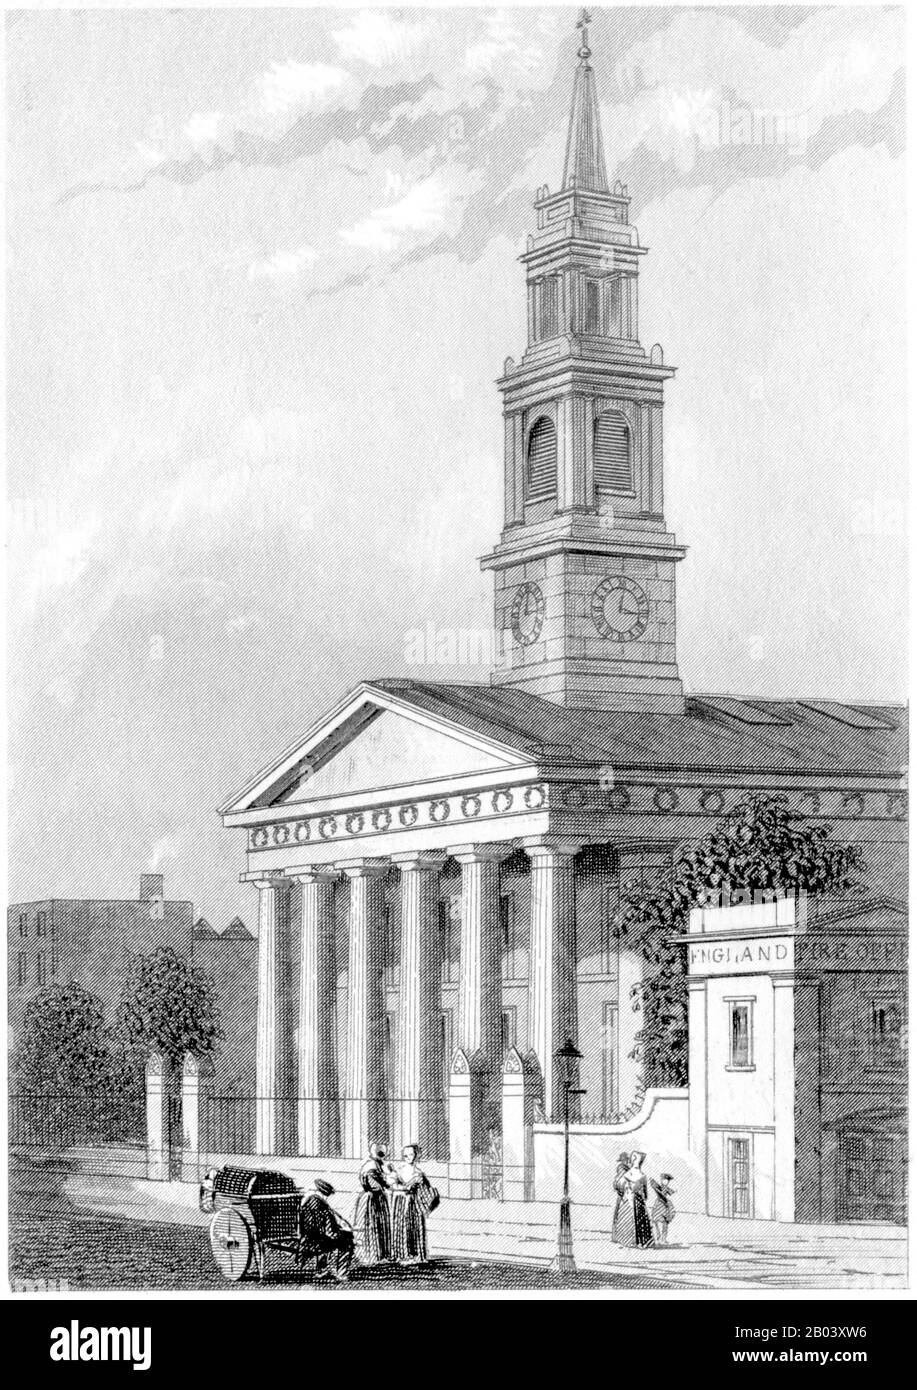 An engraving of New Church Waterloo Road, London scanned at high resolution from a book printed in 1851. Believed copyright free. Stock Photo